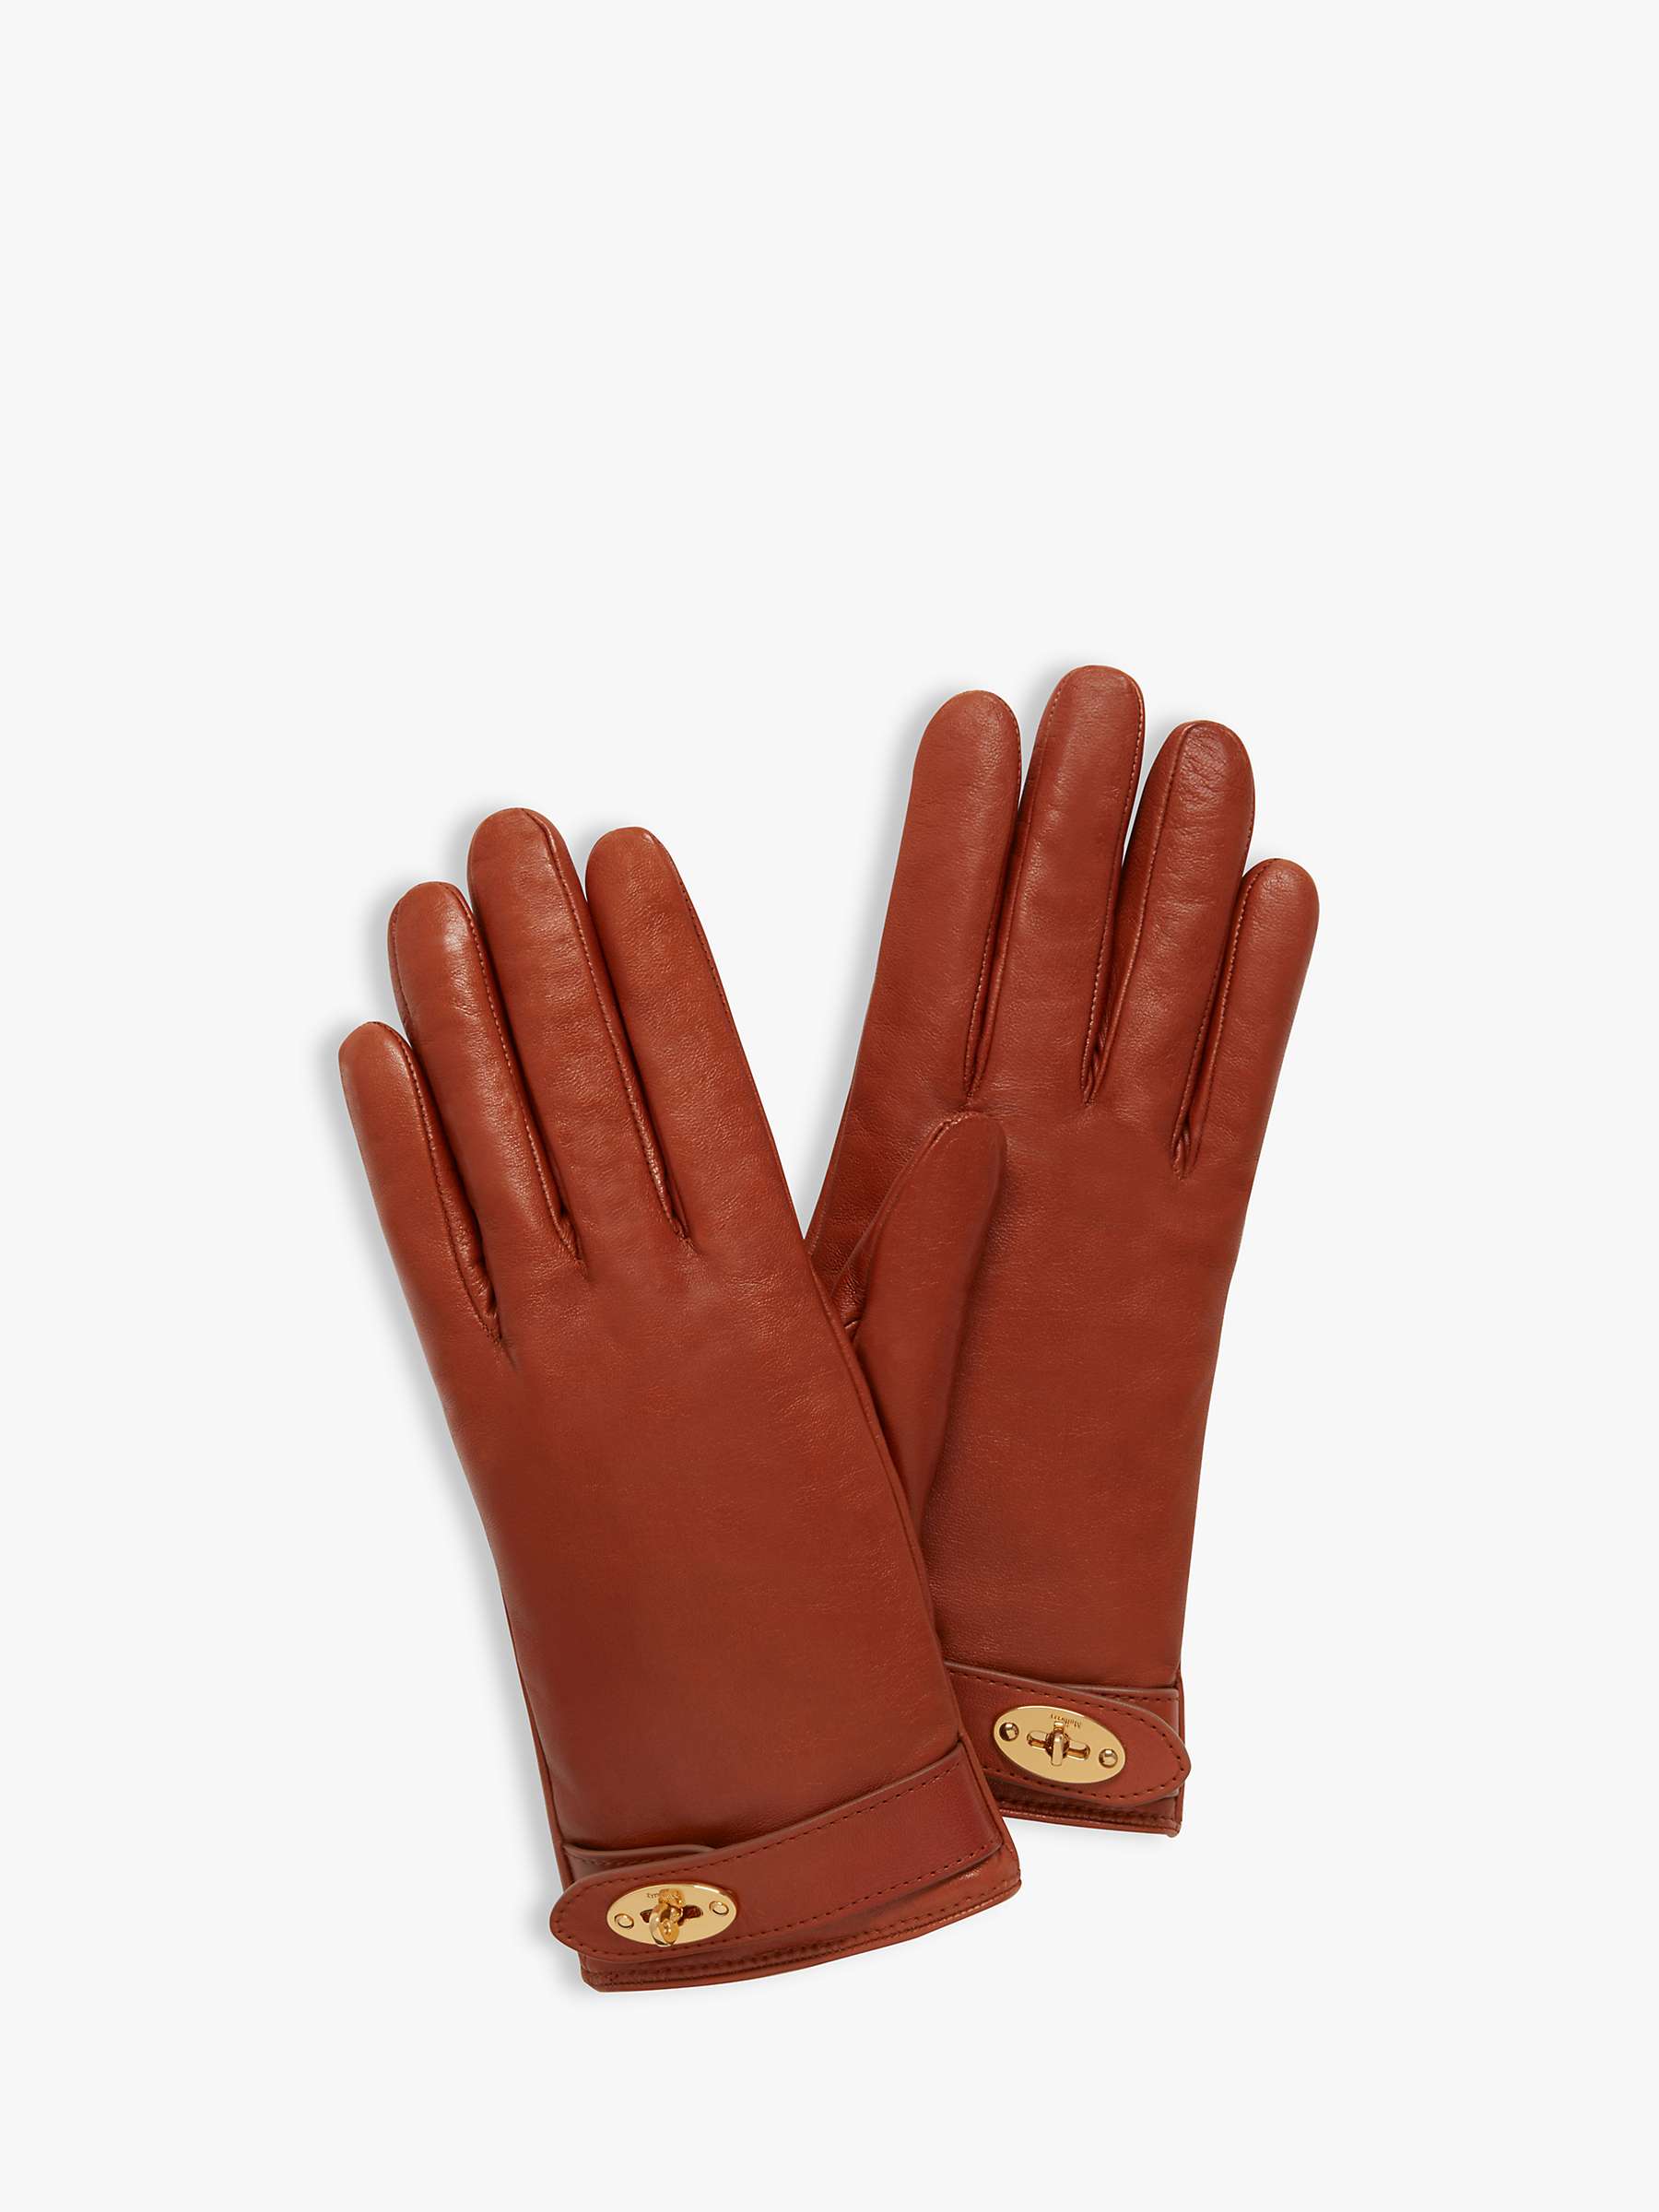 Buy Mulberry Women's Darley Nappa Leather Gloves Online at johnlewis.com